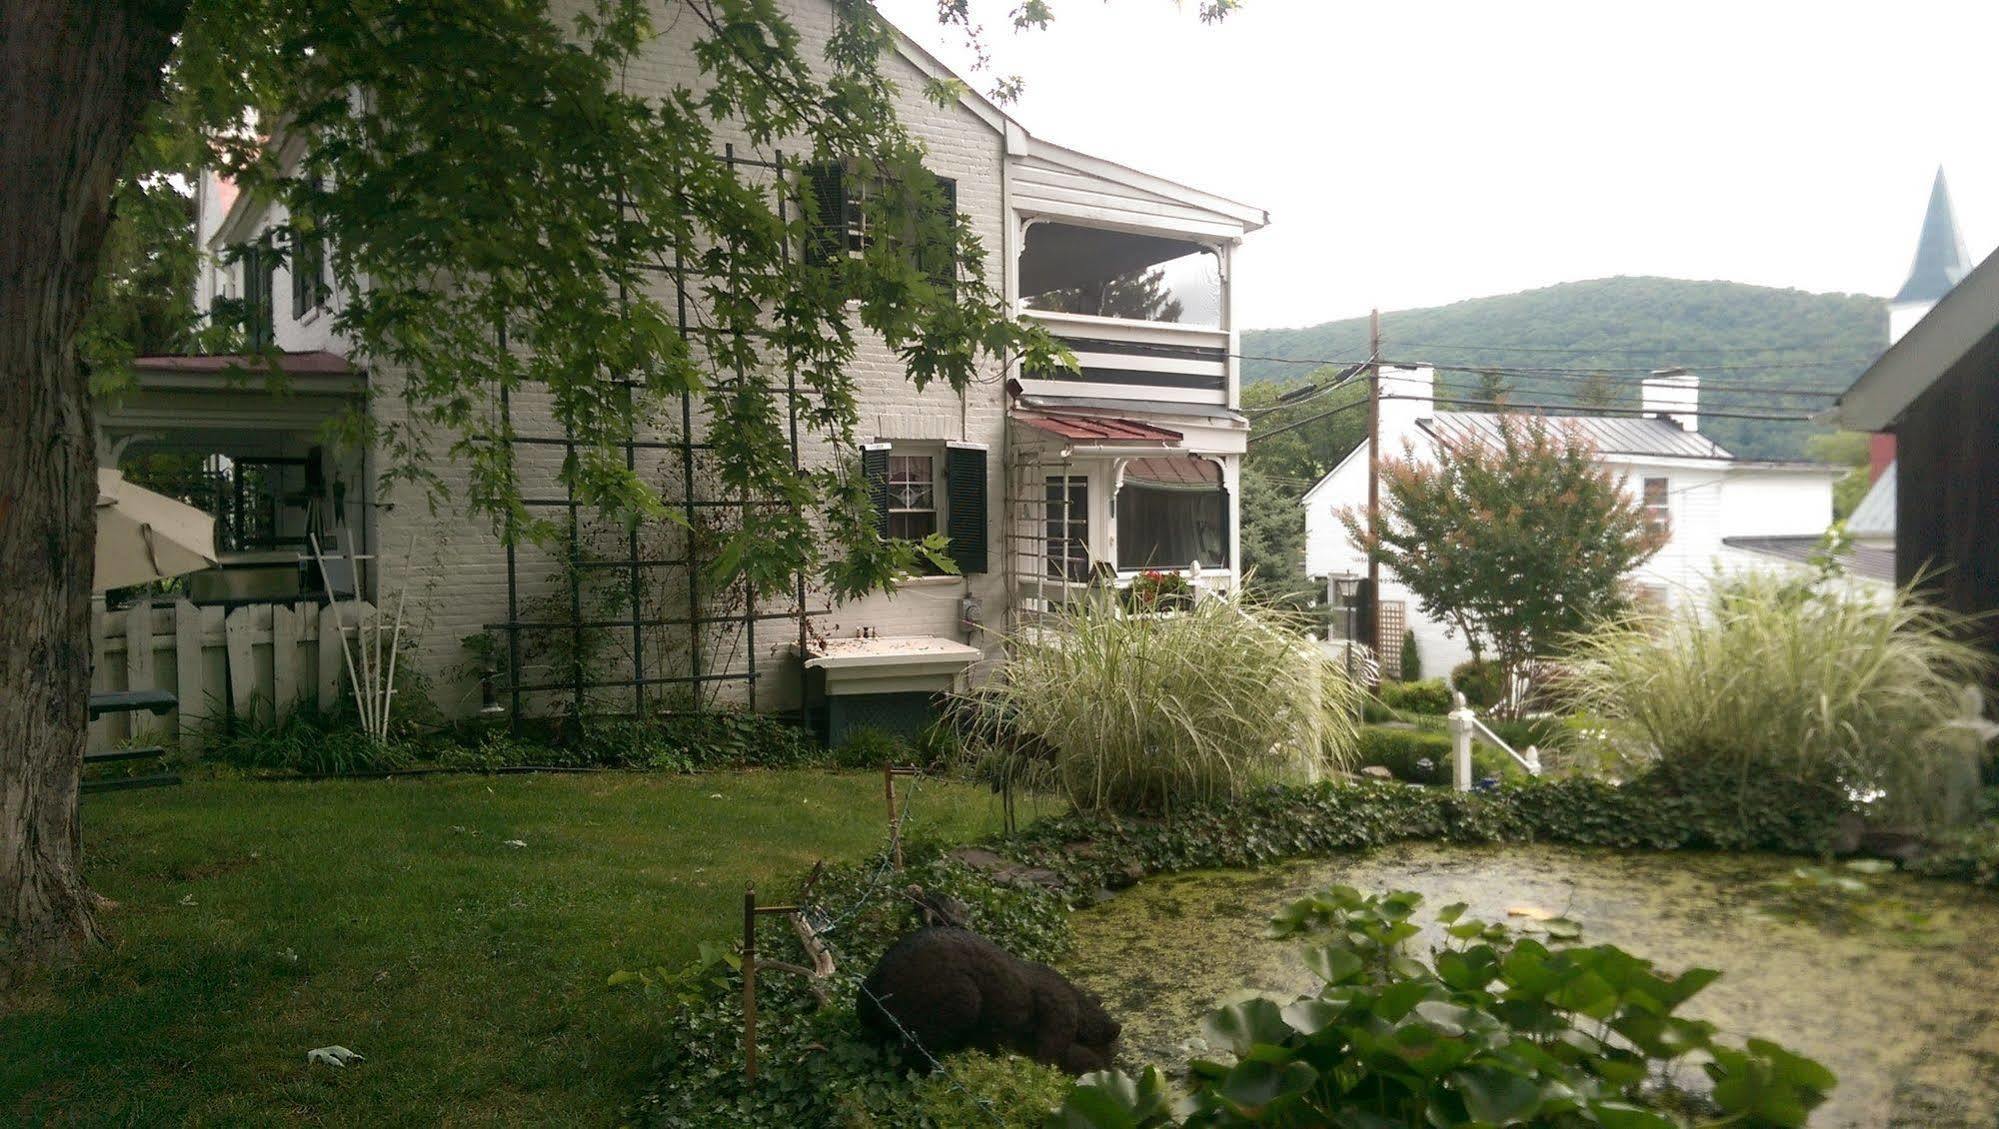 Lily Garden Bed And Breakfast Harpers Ferry Extérieur photo